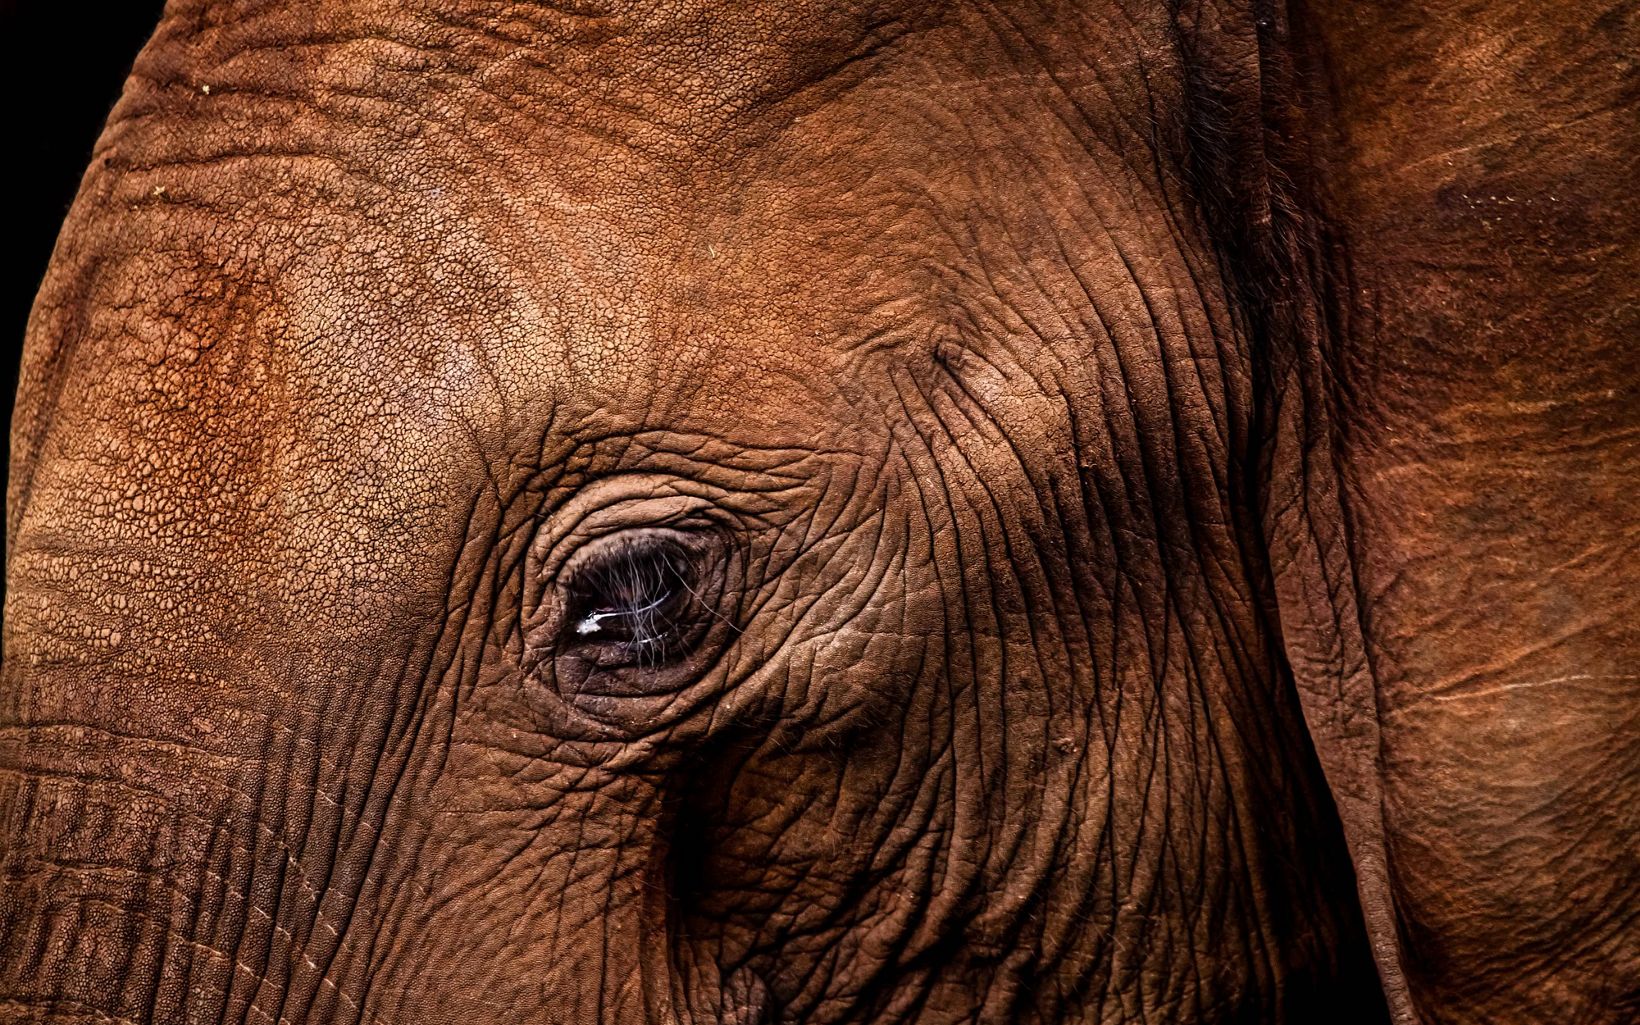 The Elephant Eye Elephants have very small eyes, but who needs good eyesight when you have the largest brain in the animal kingdom? © Jennifer Leigh